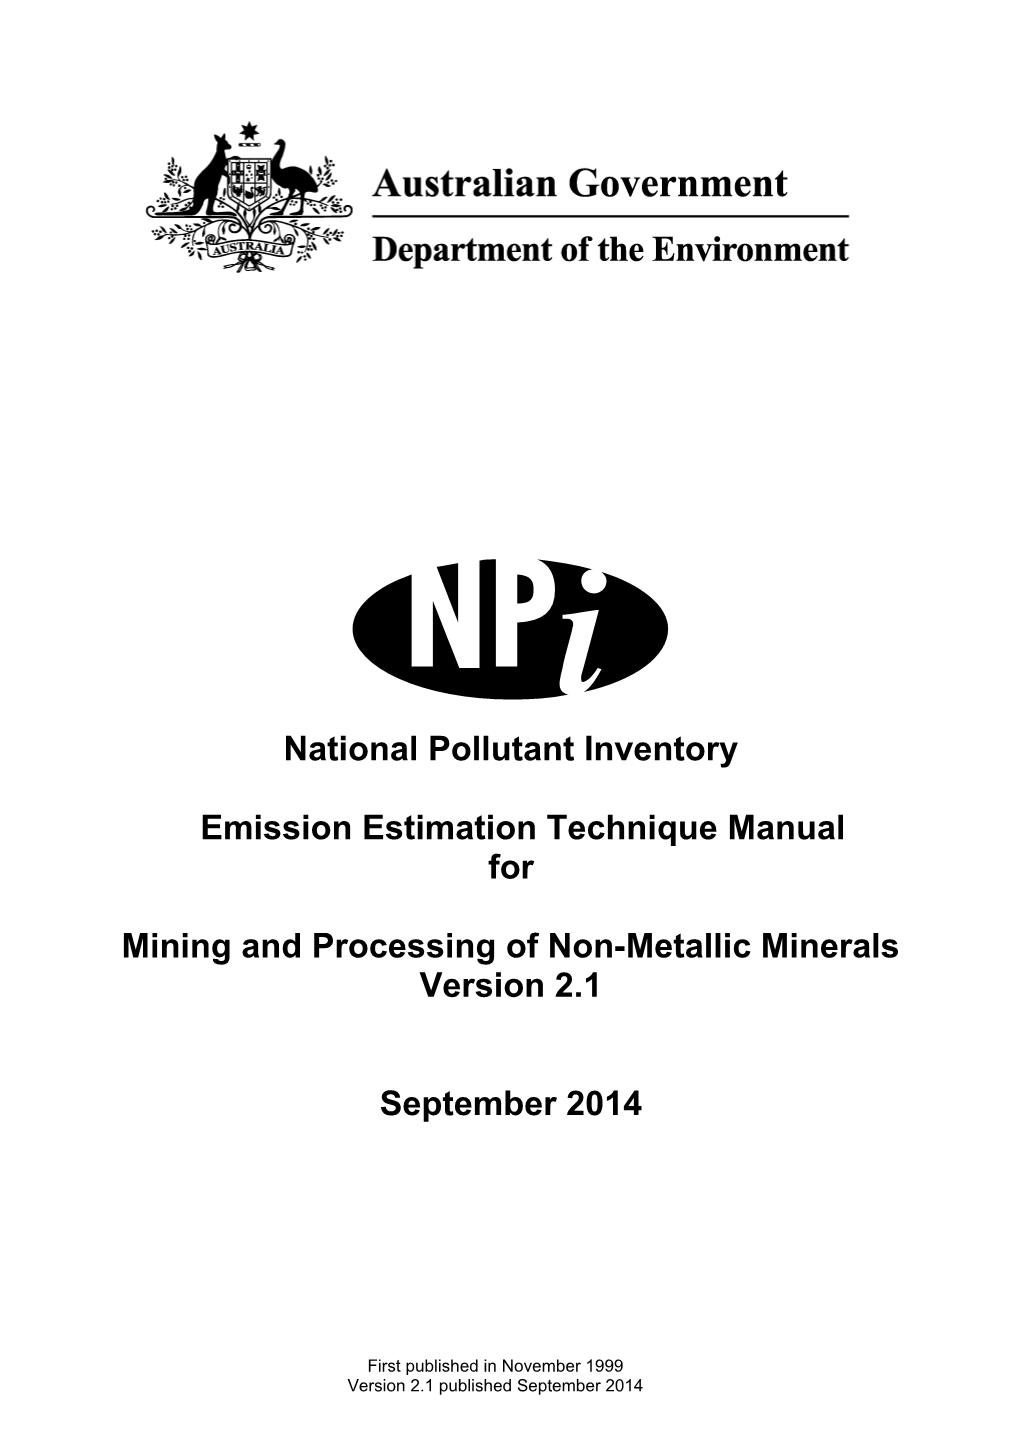 EET Manual Mining and Processing of Non-Metallic Minerals